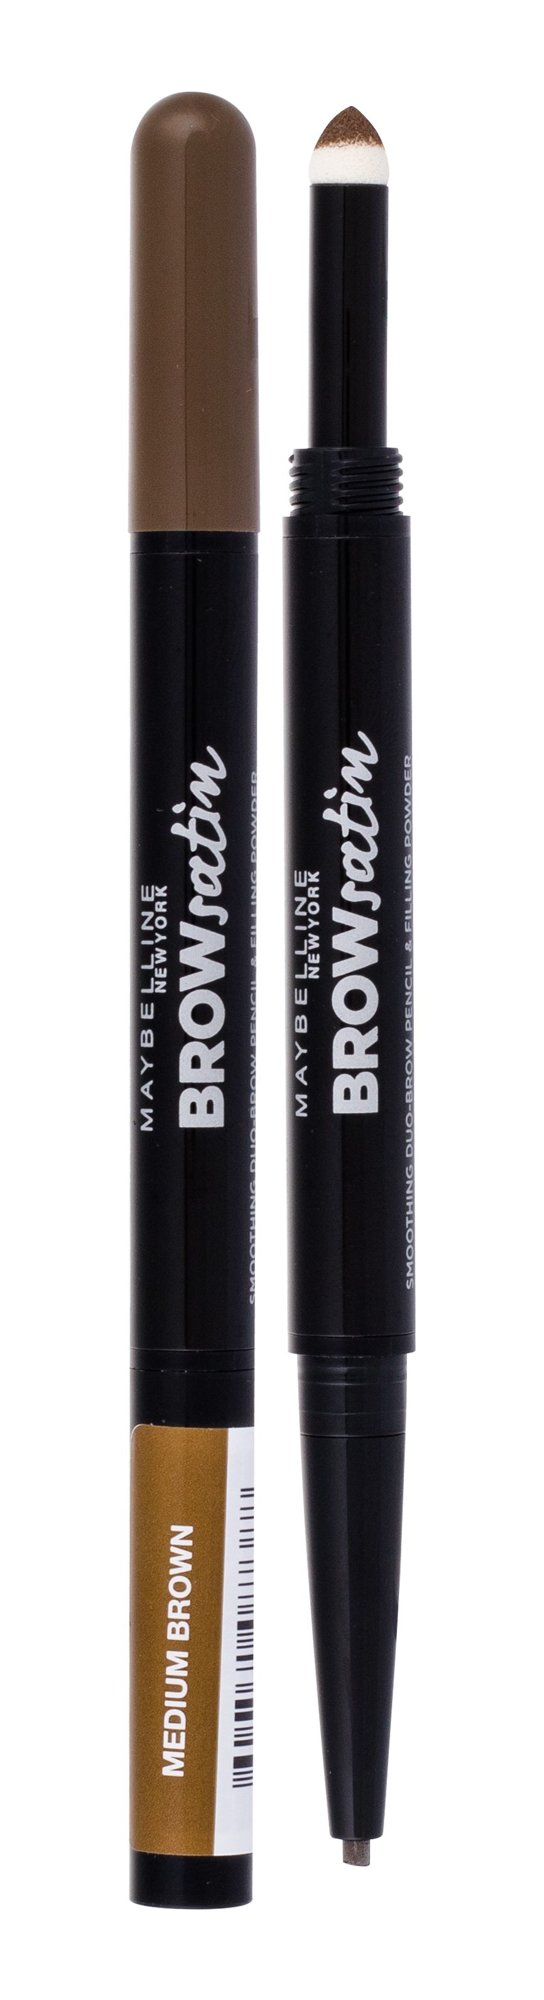 Maybelline Brow Satin Duo Brow Pencil & Filling Powder